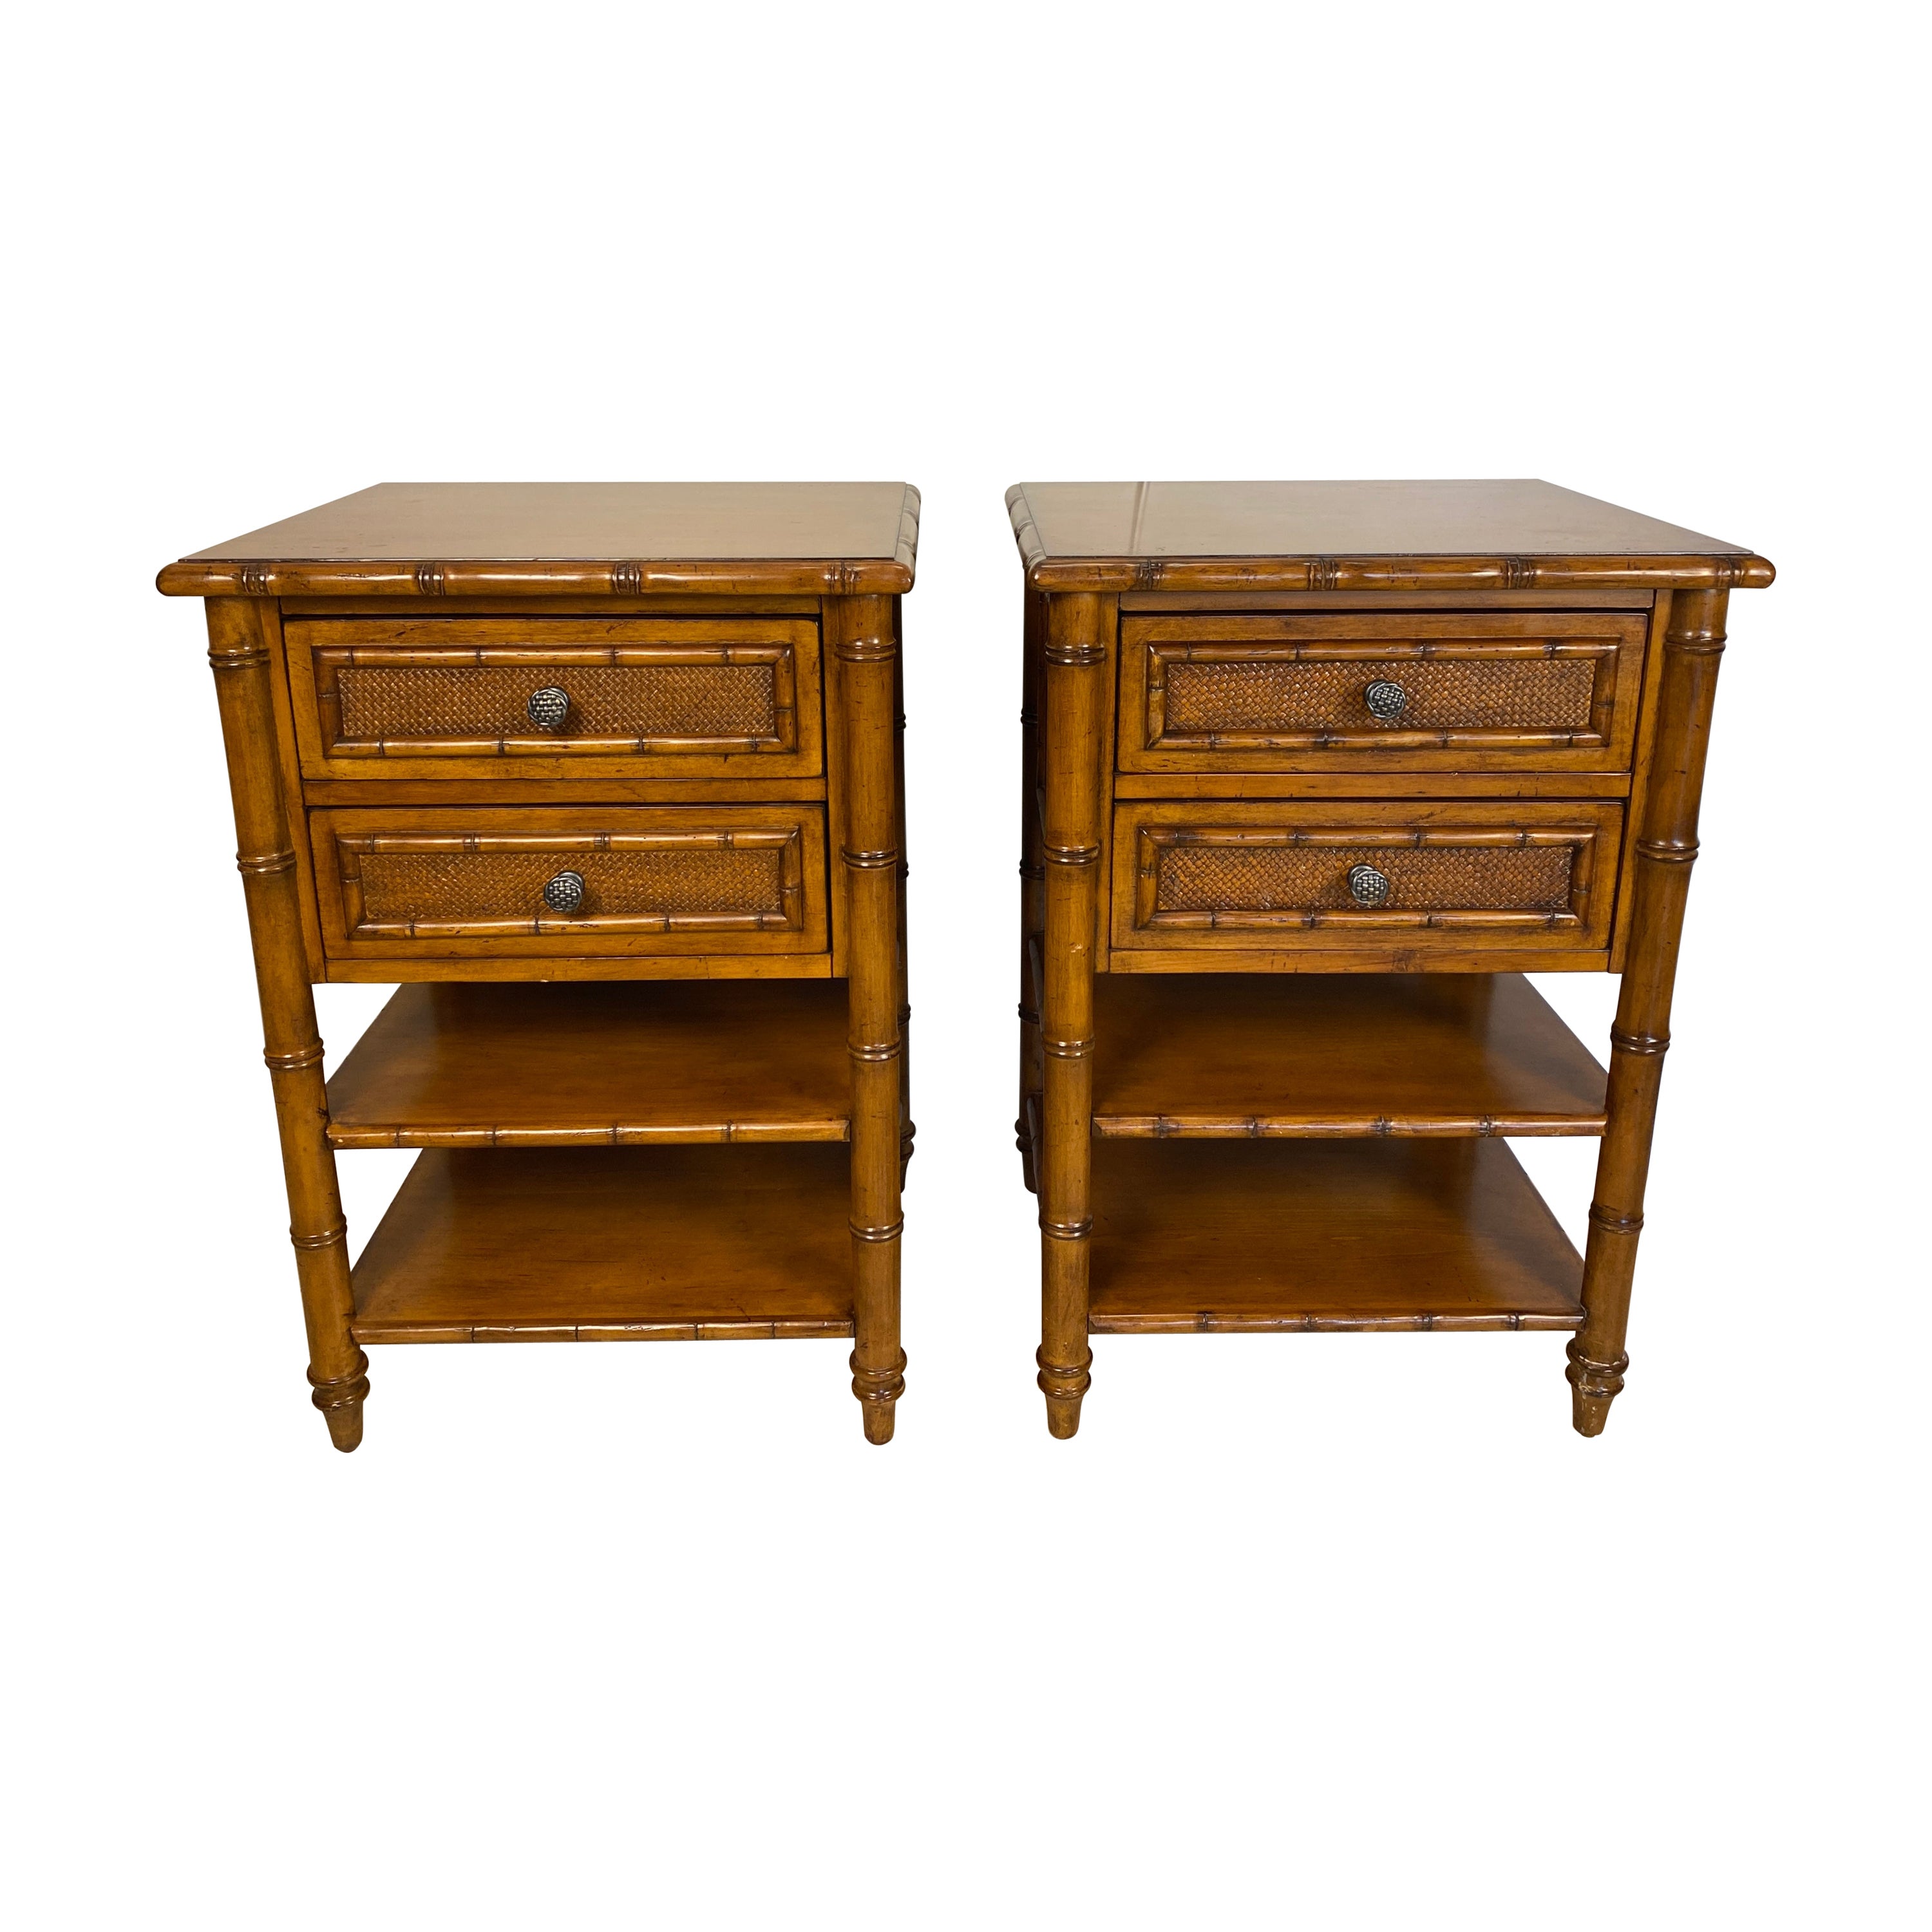 Pair of Vintage Faux Bamboo Wooden Nightstands or Bedside Tables